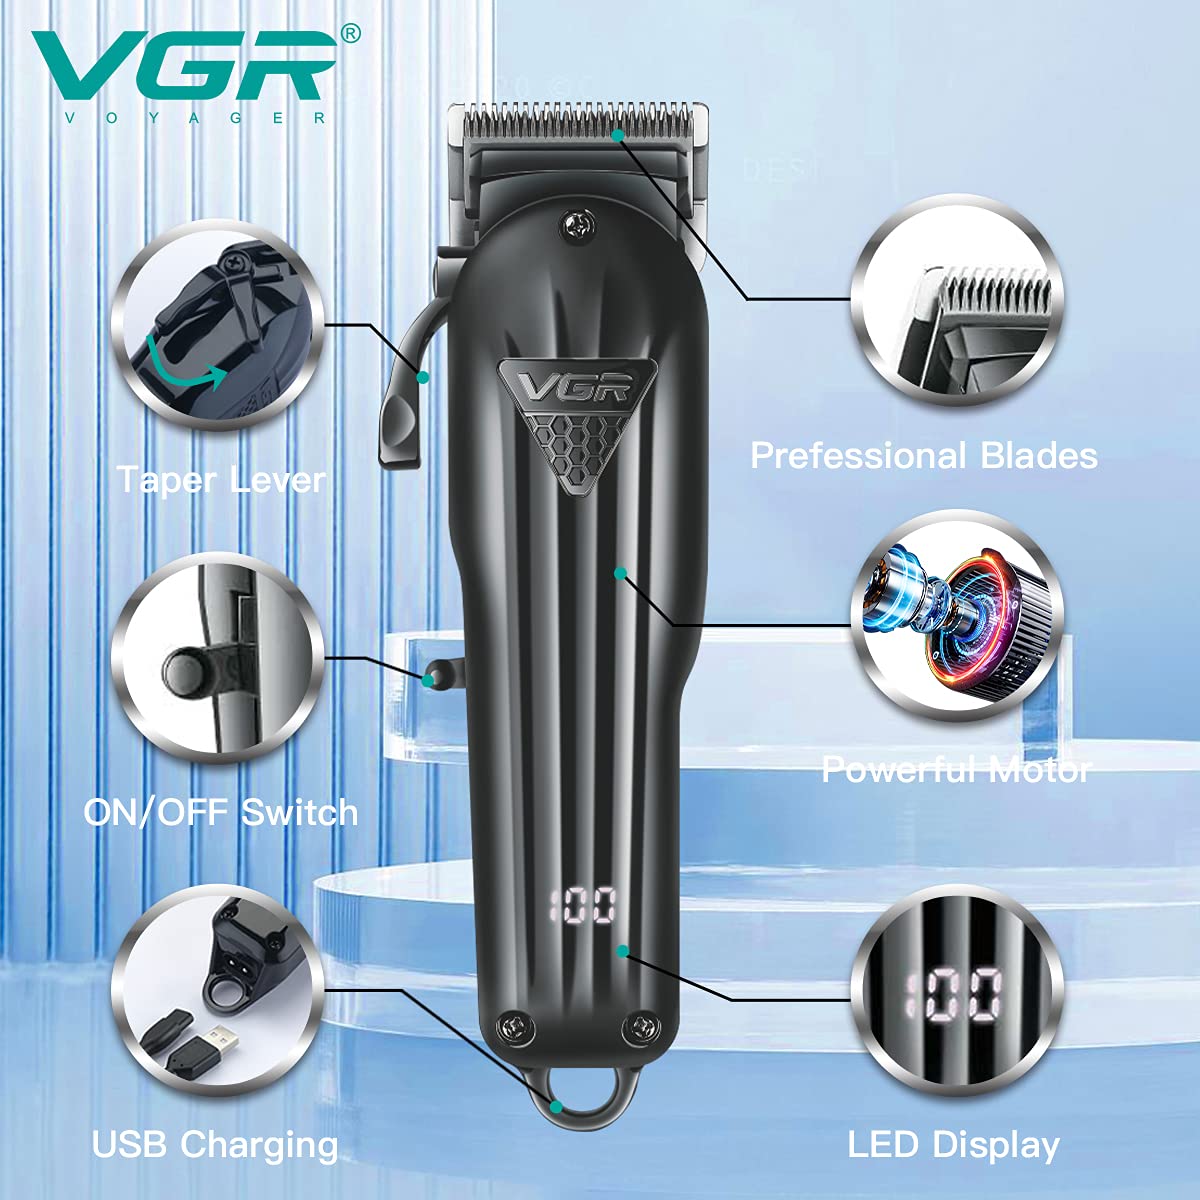 VGR Professional Rechargeable Hair Clipper: Buy Cordless Trimmer For hair and beard Cutting Best Price in Sri Lanka | ido.lk